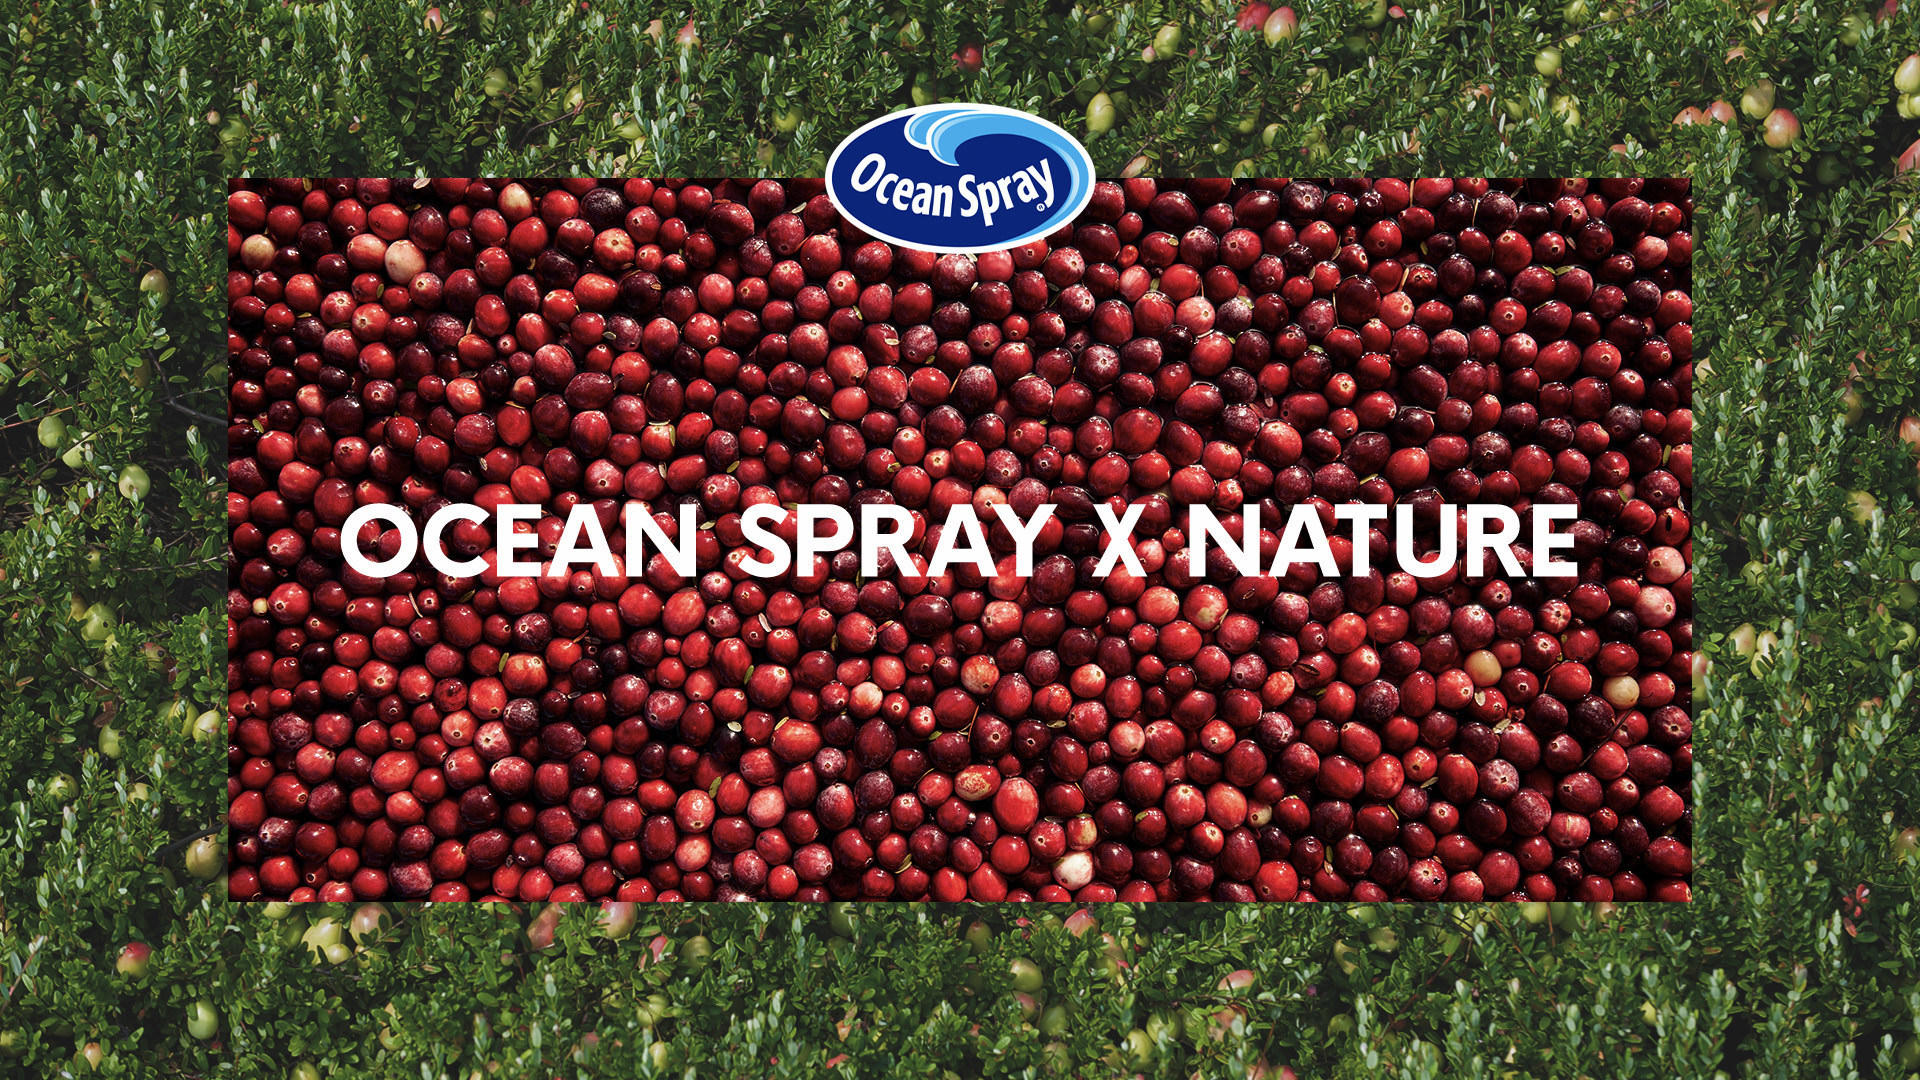 Ocean Spray Launches New Marketing Campaign